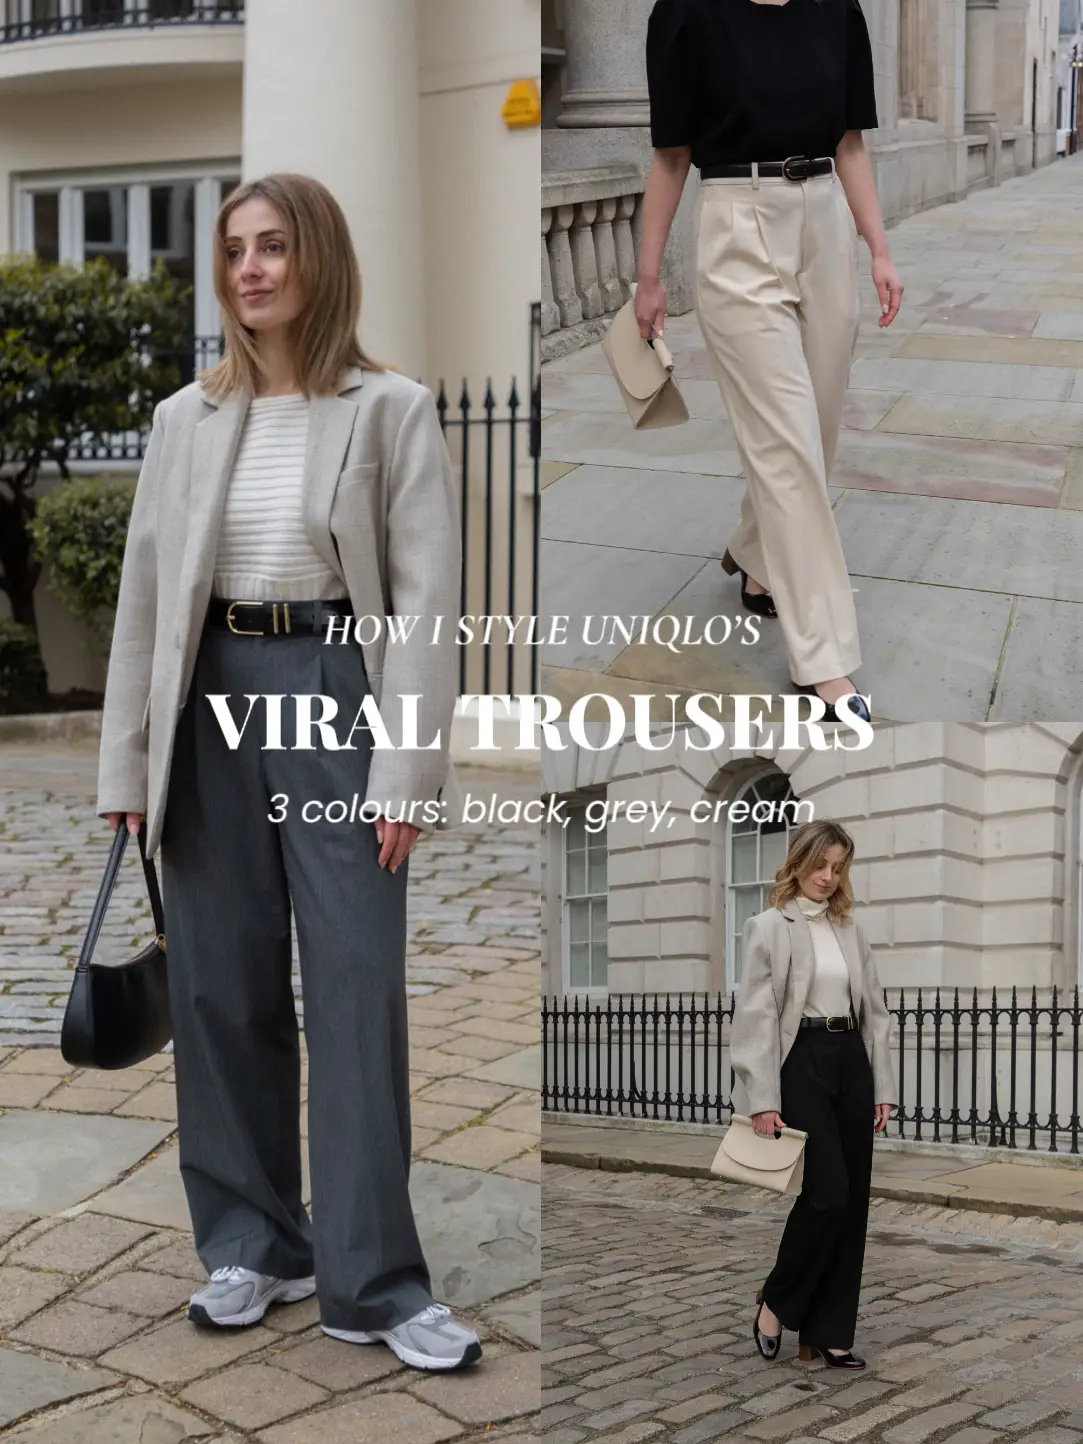 Uniqlo viral trousers: how I style them 🖤, Gallery posted by Sarah  Mantelin